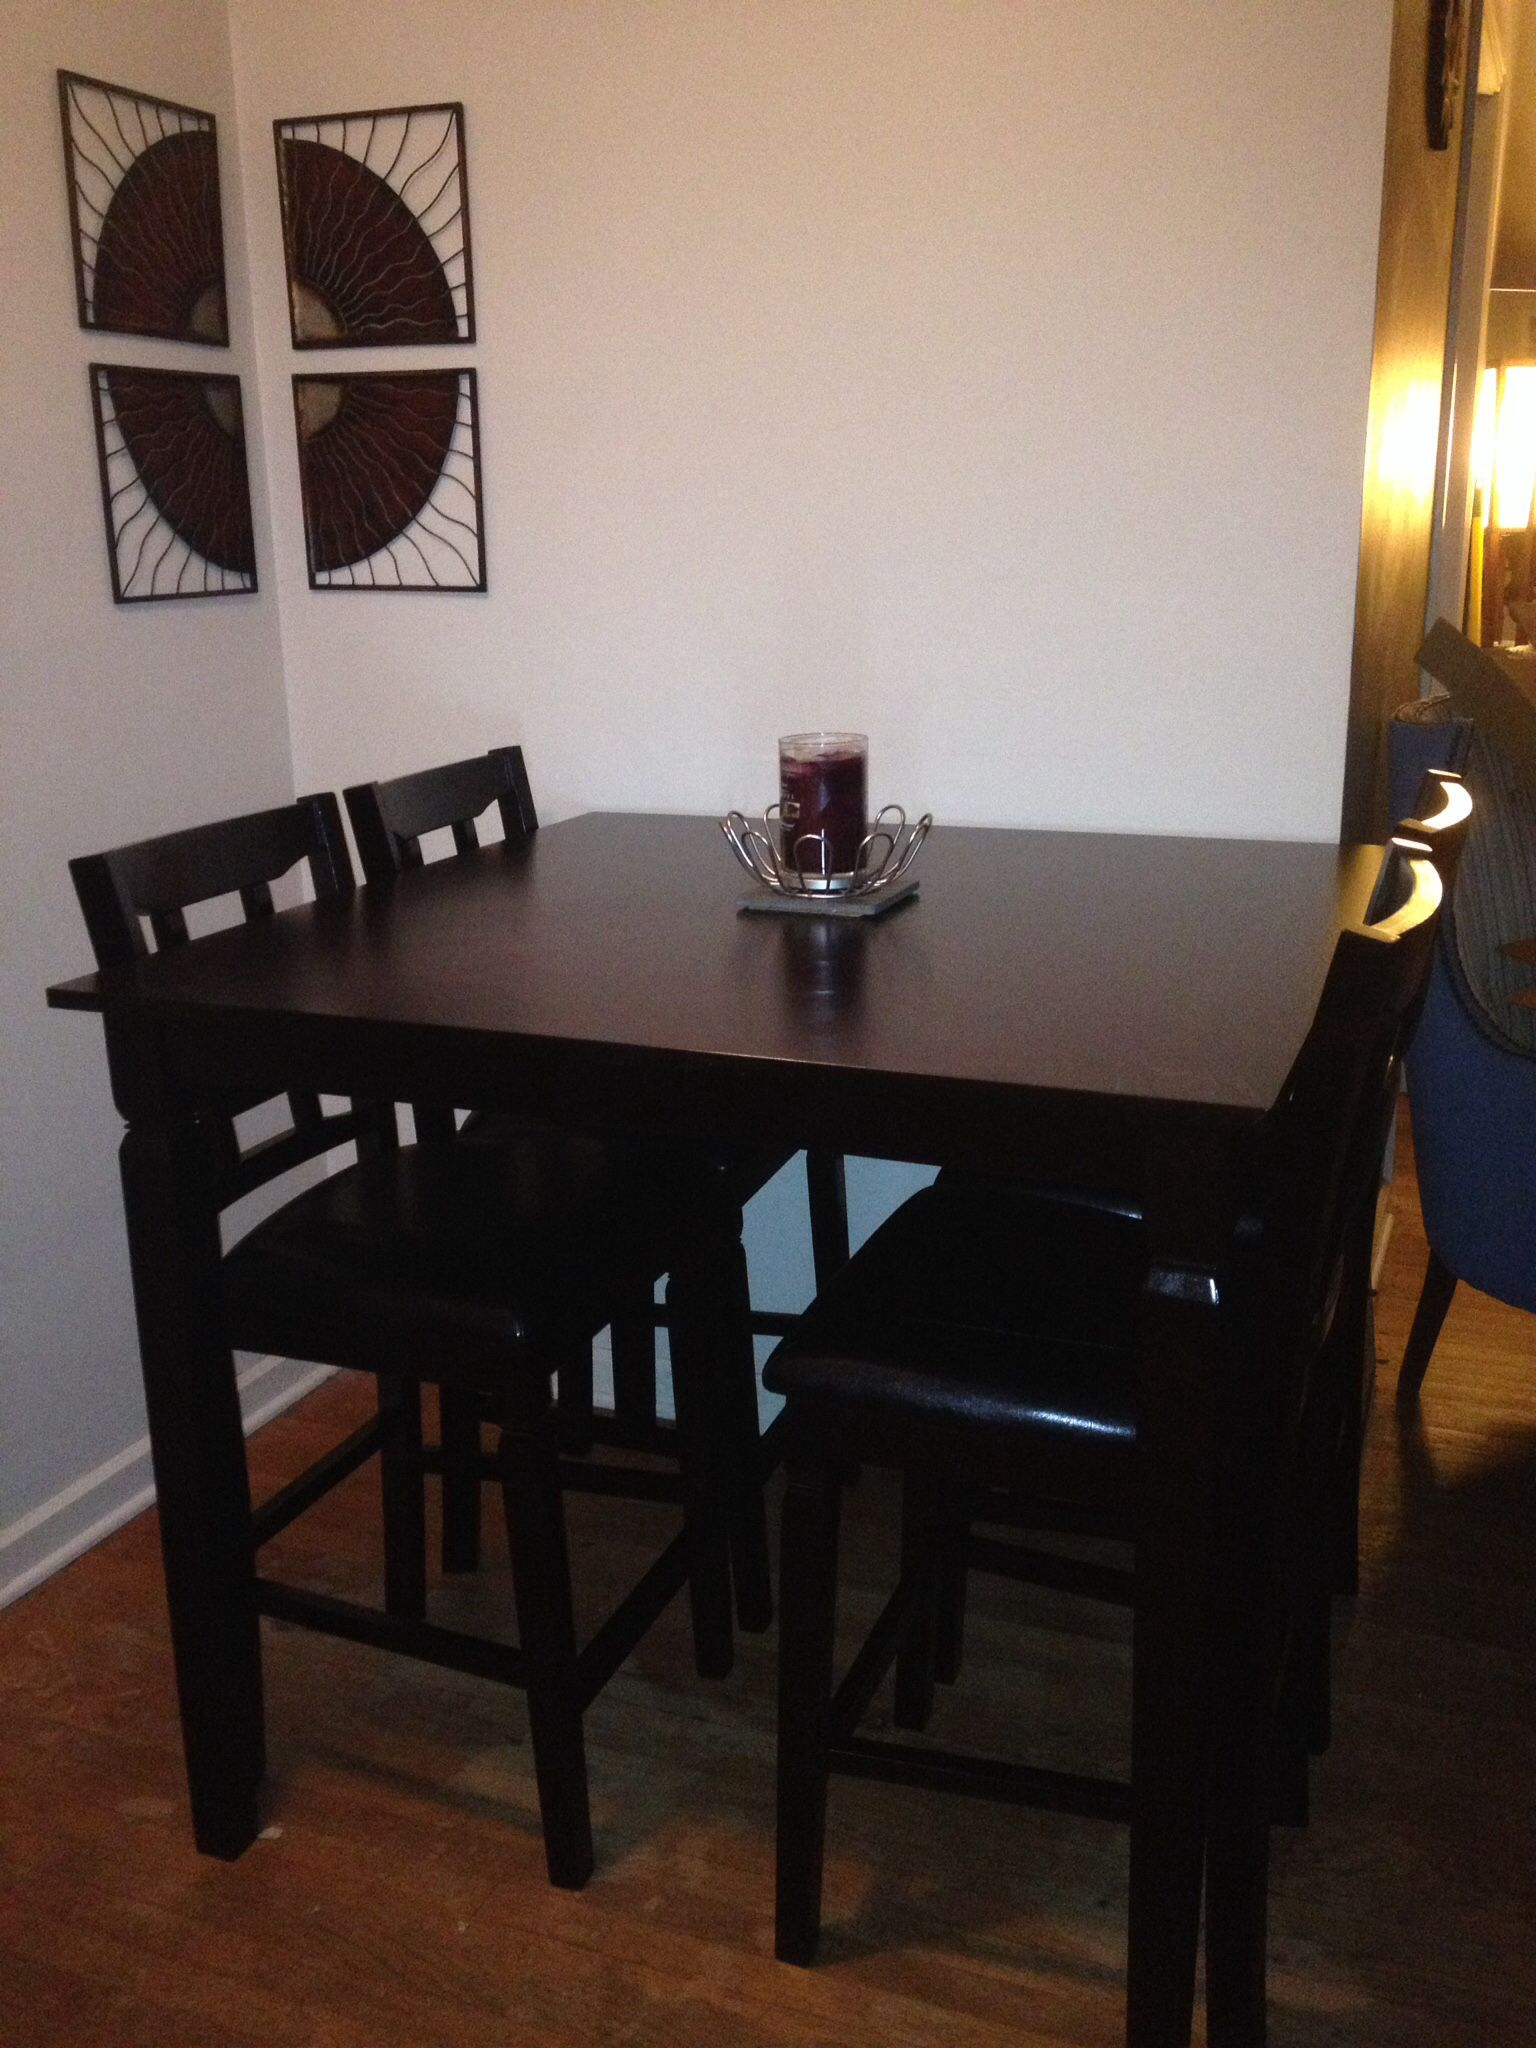 Espresso Pub Table And Chairs From Big Lots Works Great In inside sizing 1536 X 2048